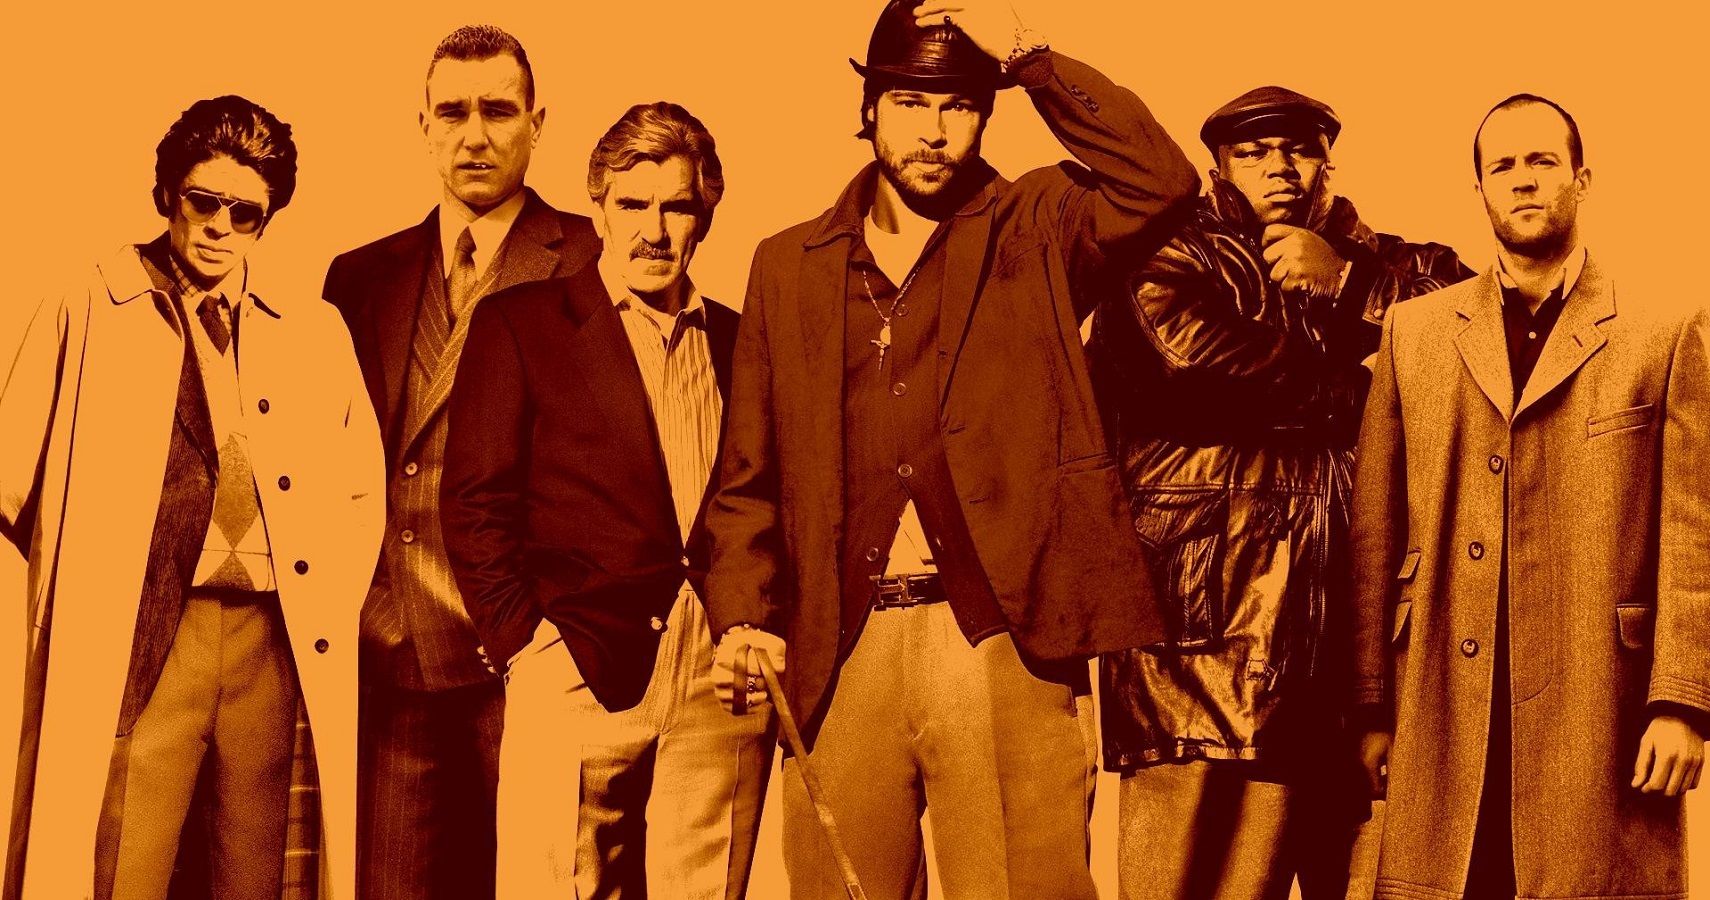 Every Guy Ritchie Film Ranked From Worst To First